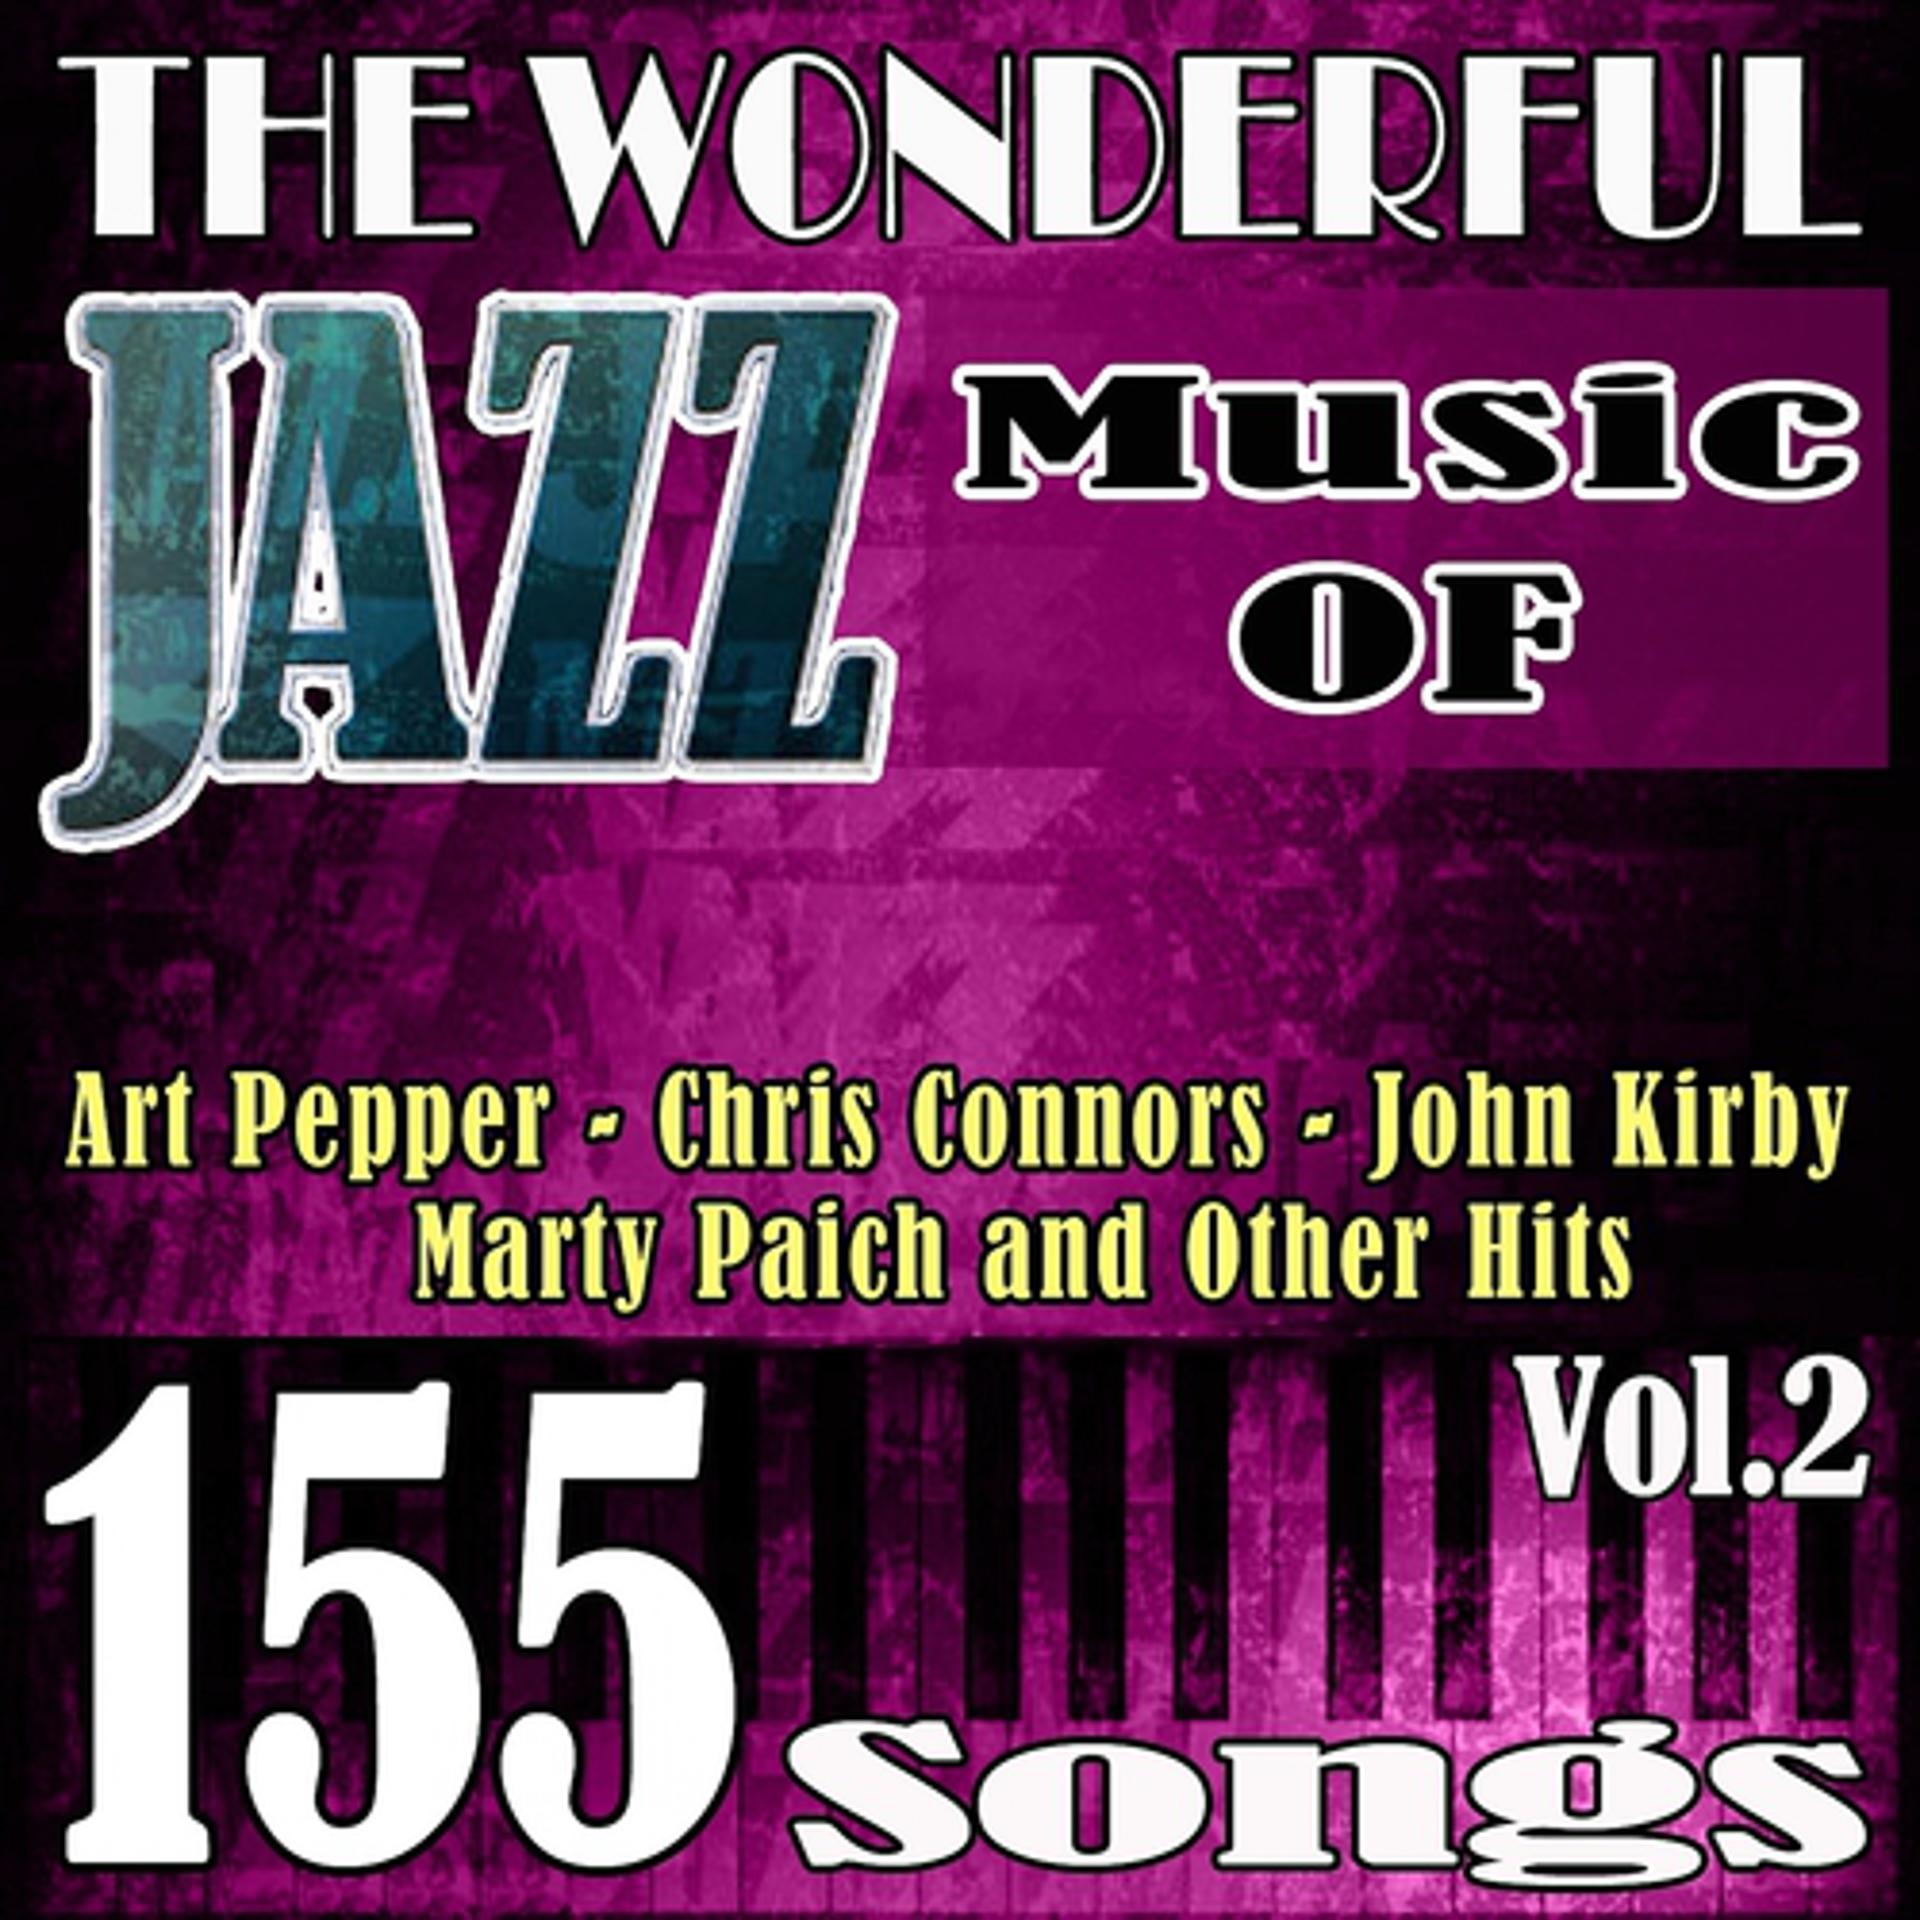 Постер альбома The Wonderful Jazz Music of Art Pepper, Chris Connors, John Kirby, Marty Paich and Other Hits, Vol. 2